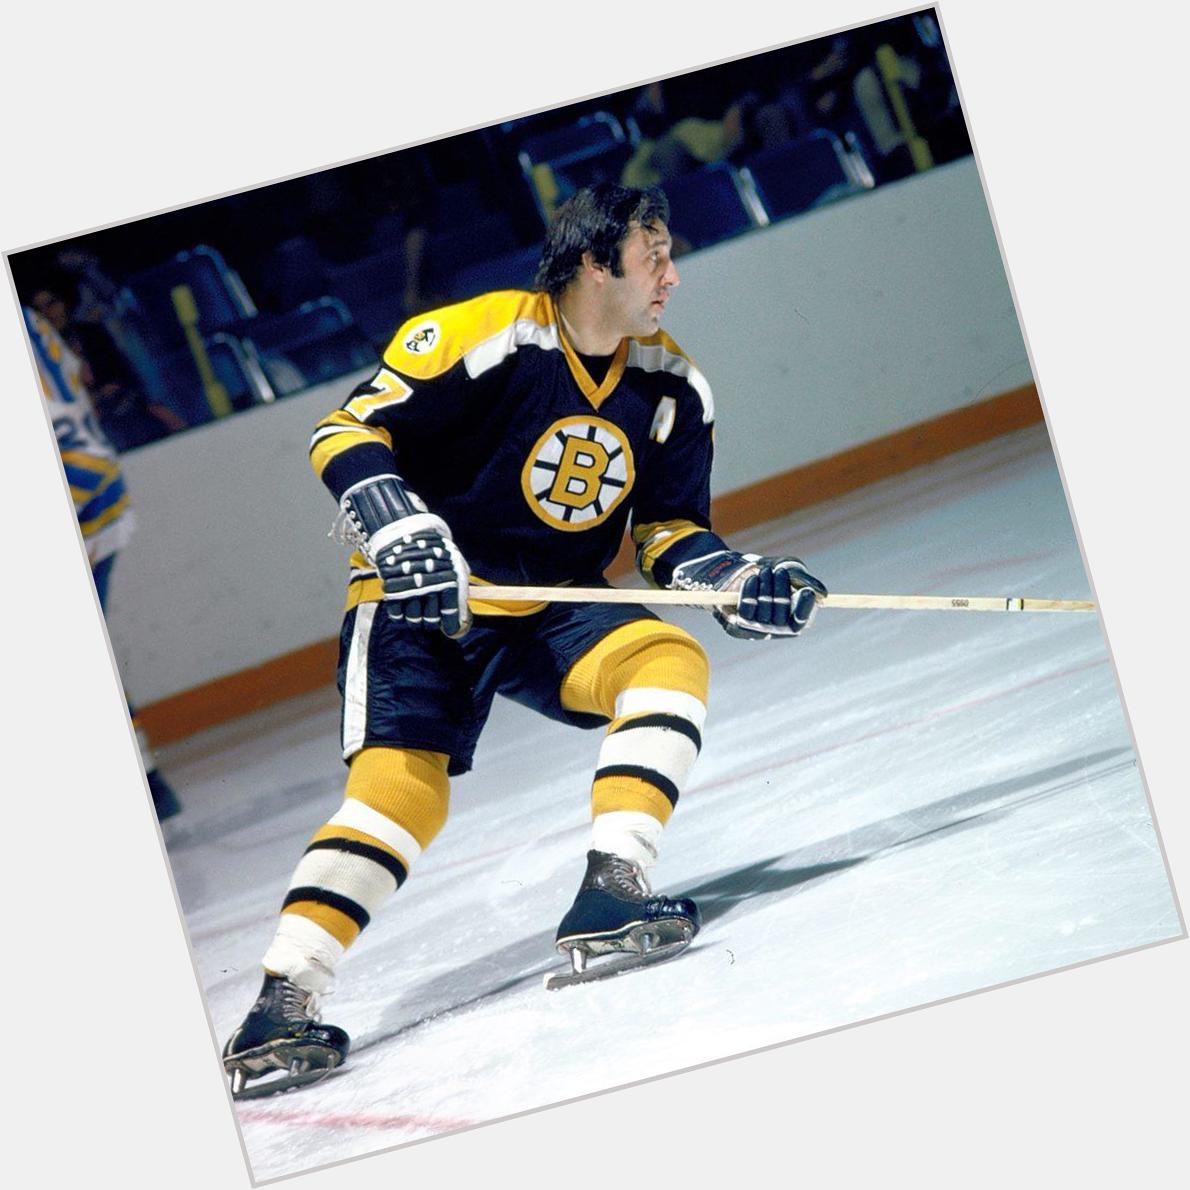 Happy birthday to one of my most favorite players in NHL history, Phil Esposito!!!! 